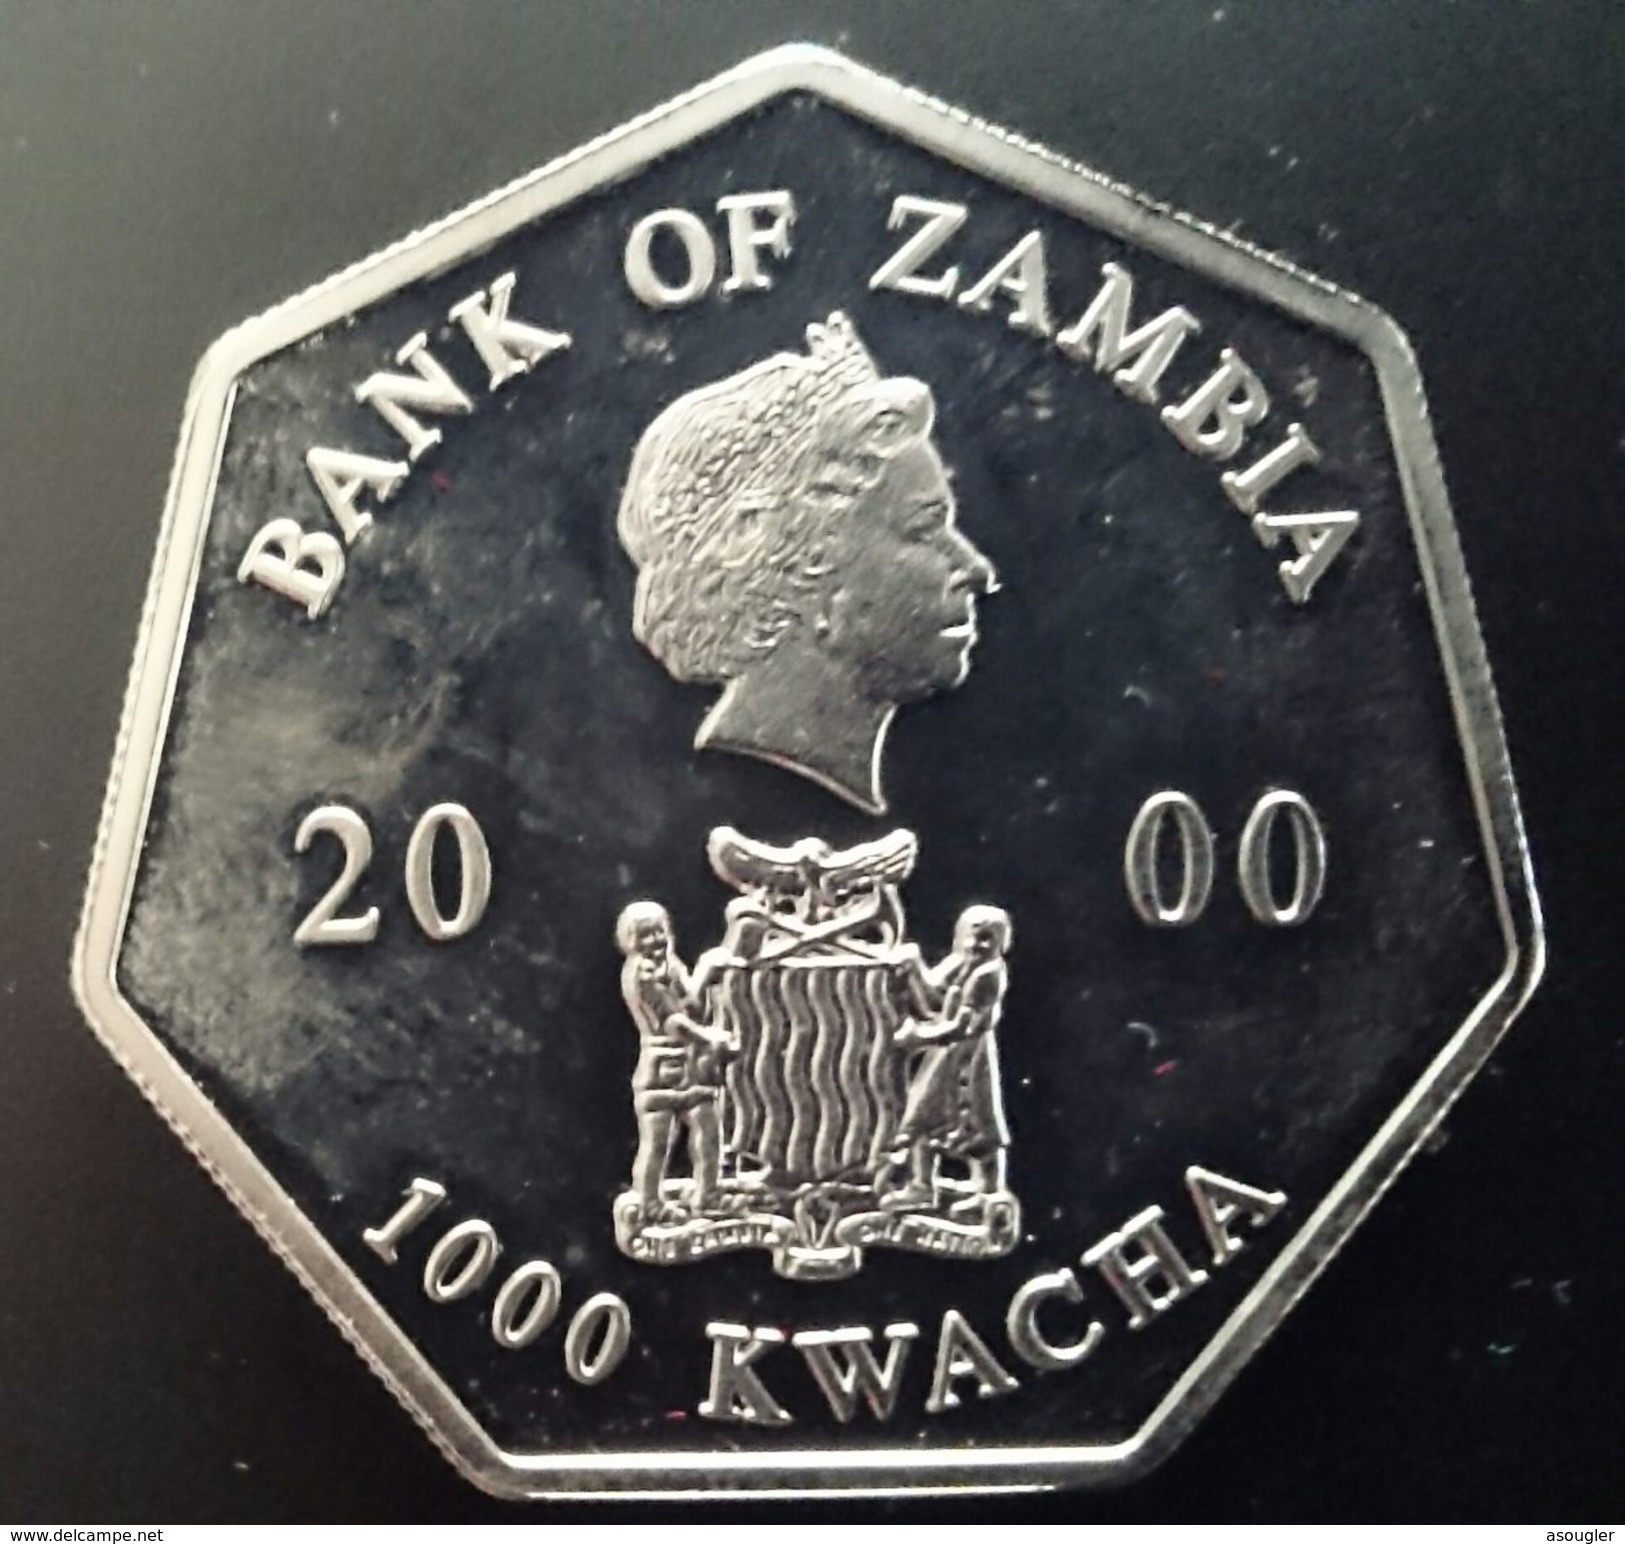 ZAMBIA 1000 KWACHA 2000 PROOF "Dated Calendar 2001 Within Circular Design" Free Shipping Via Registered Air Mail - Zambia